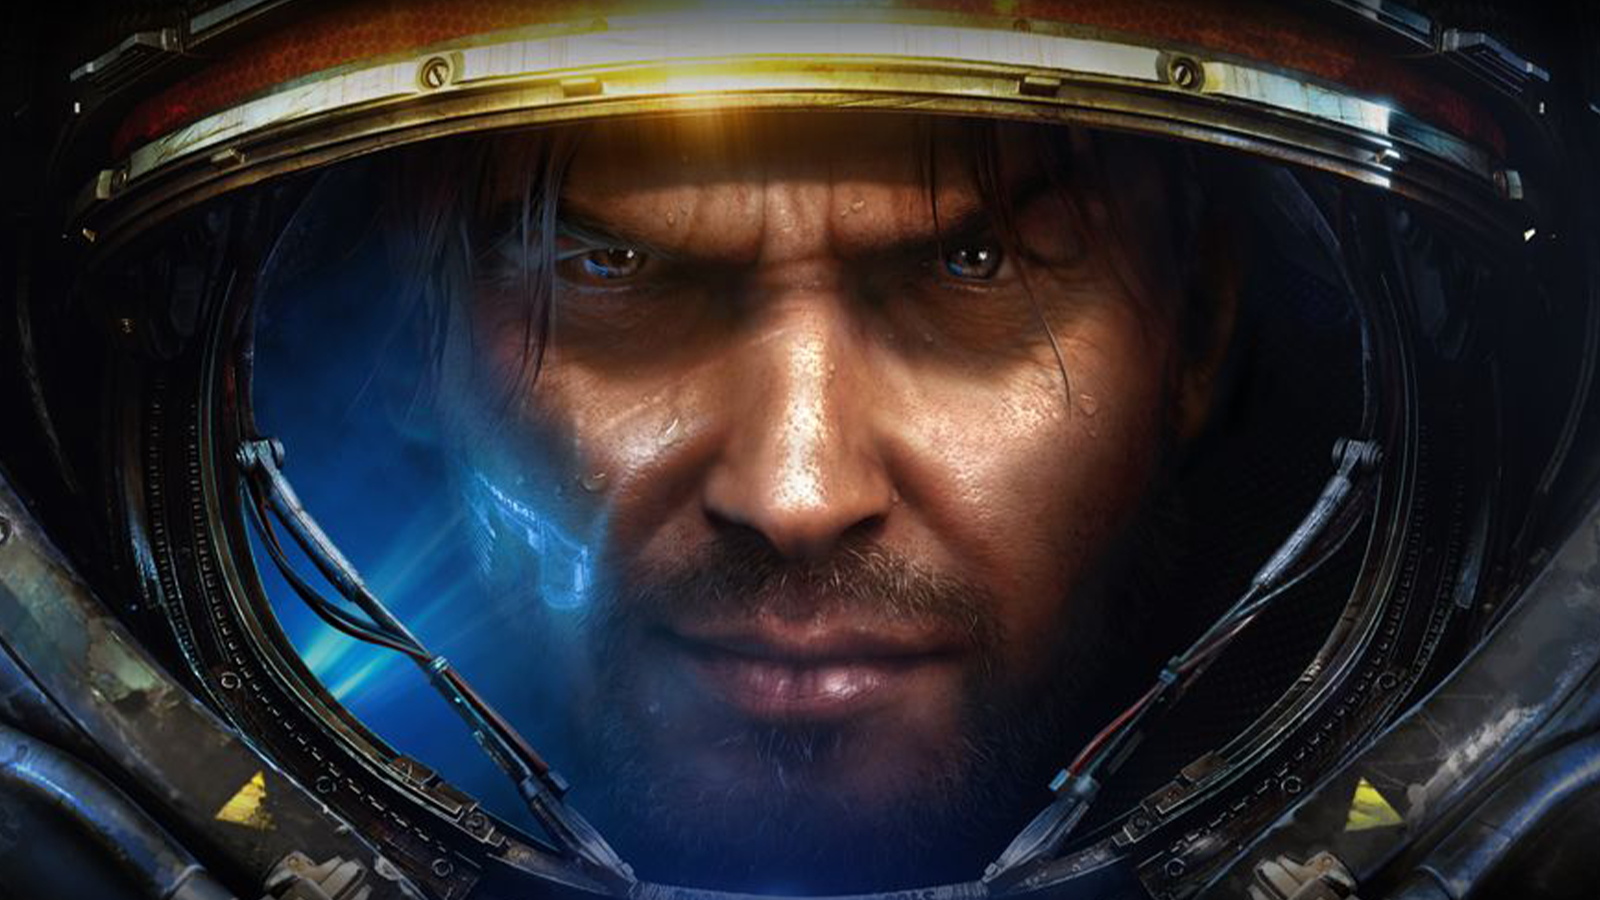 StarCraft 2 lead dev teases new “paradigm-shifting” RTS game